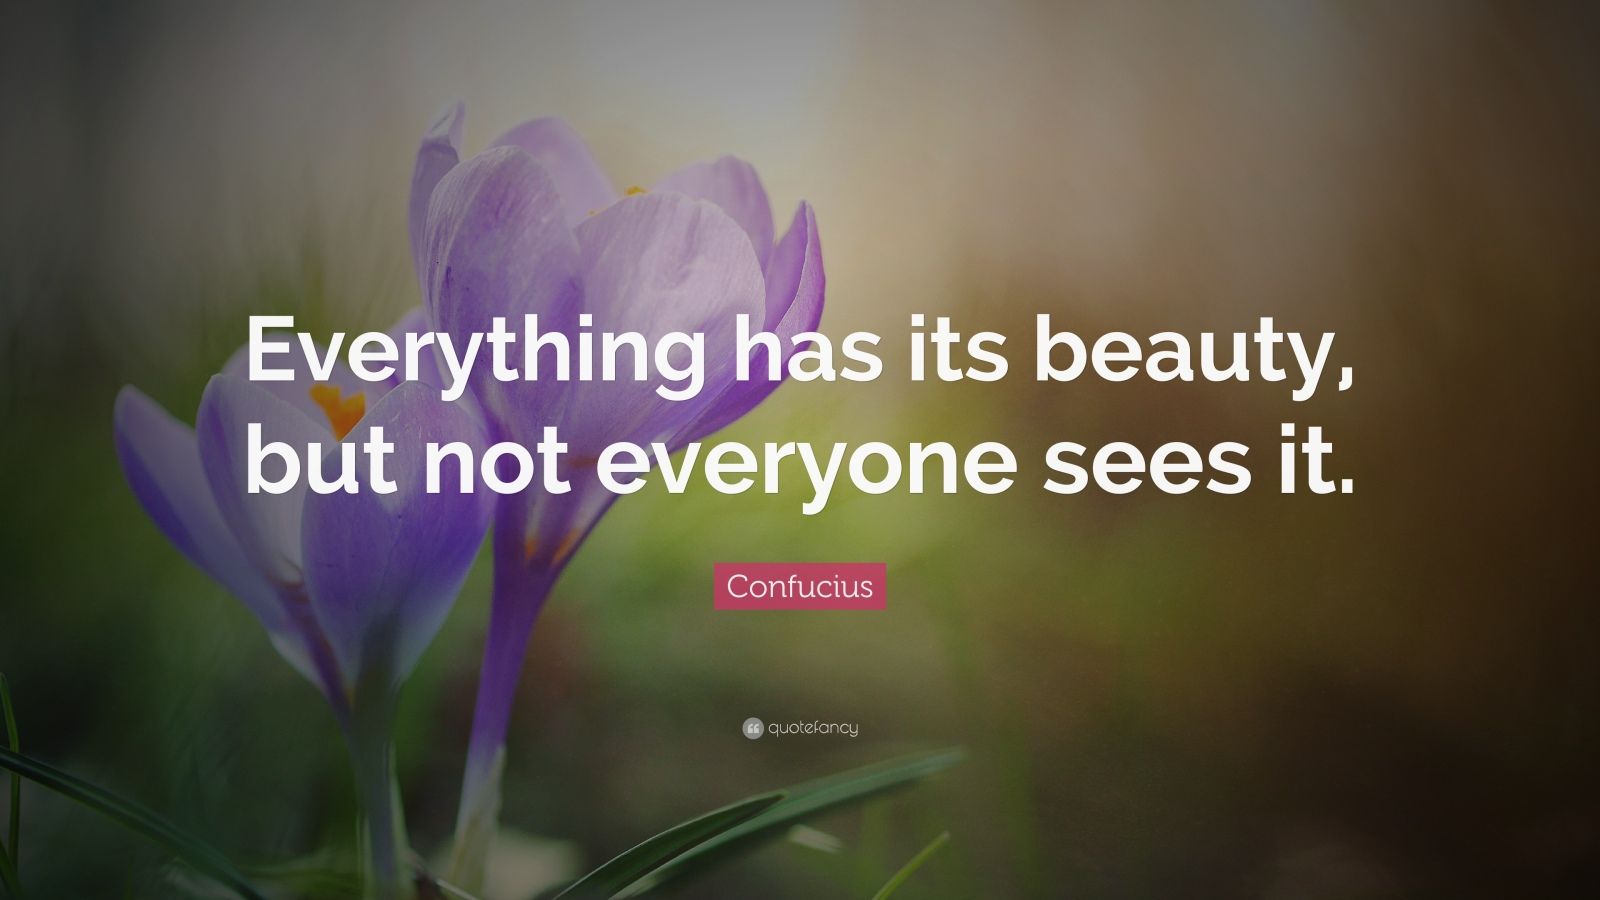 Confucius Quote: “Everything has its beauty, but not everyone sees it ...